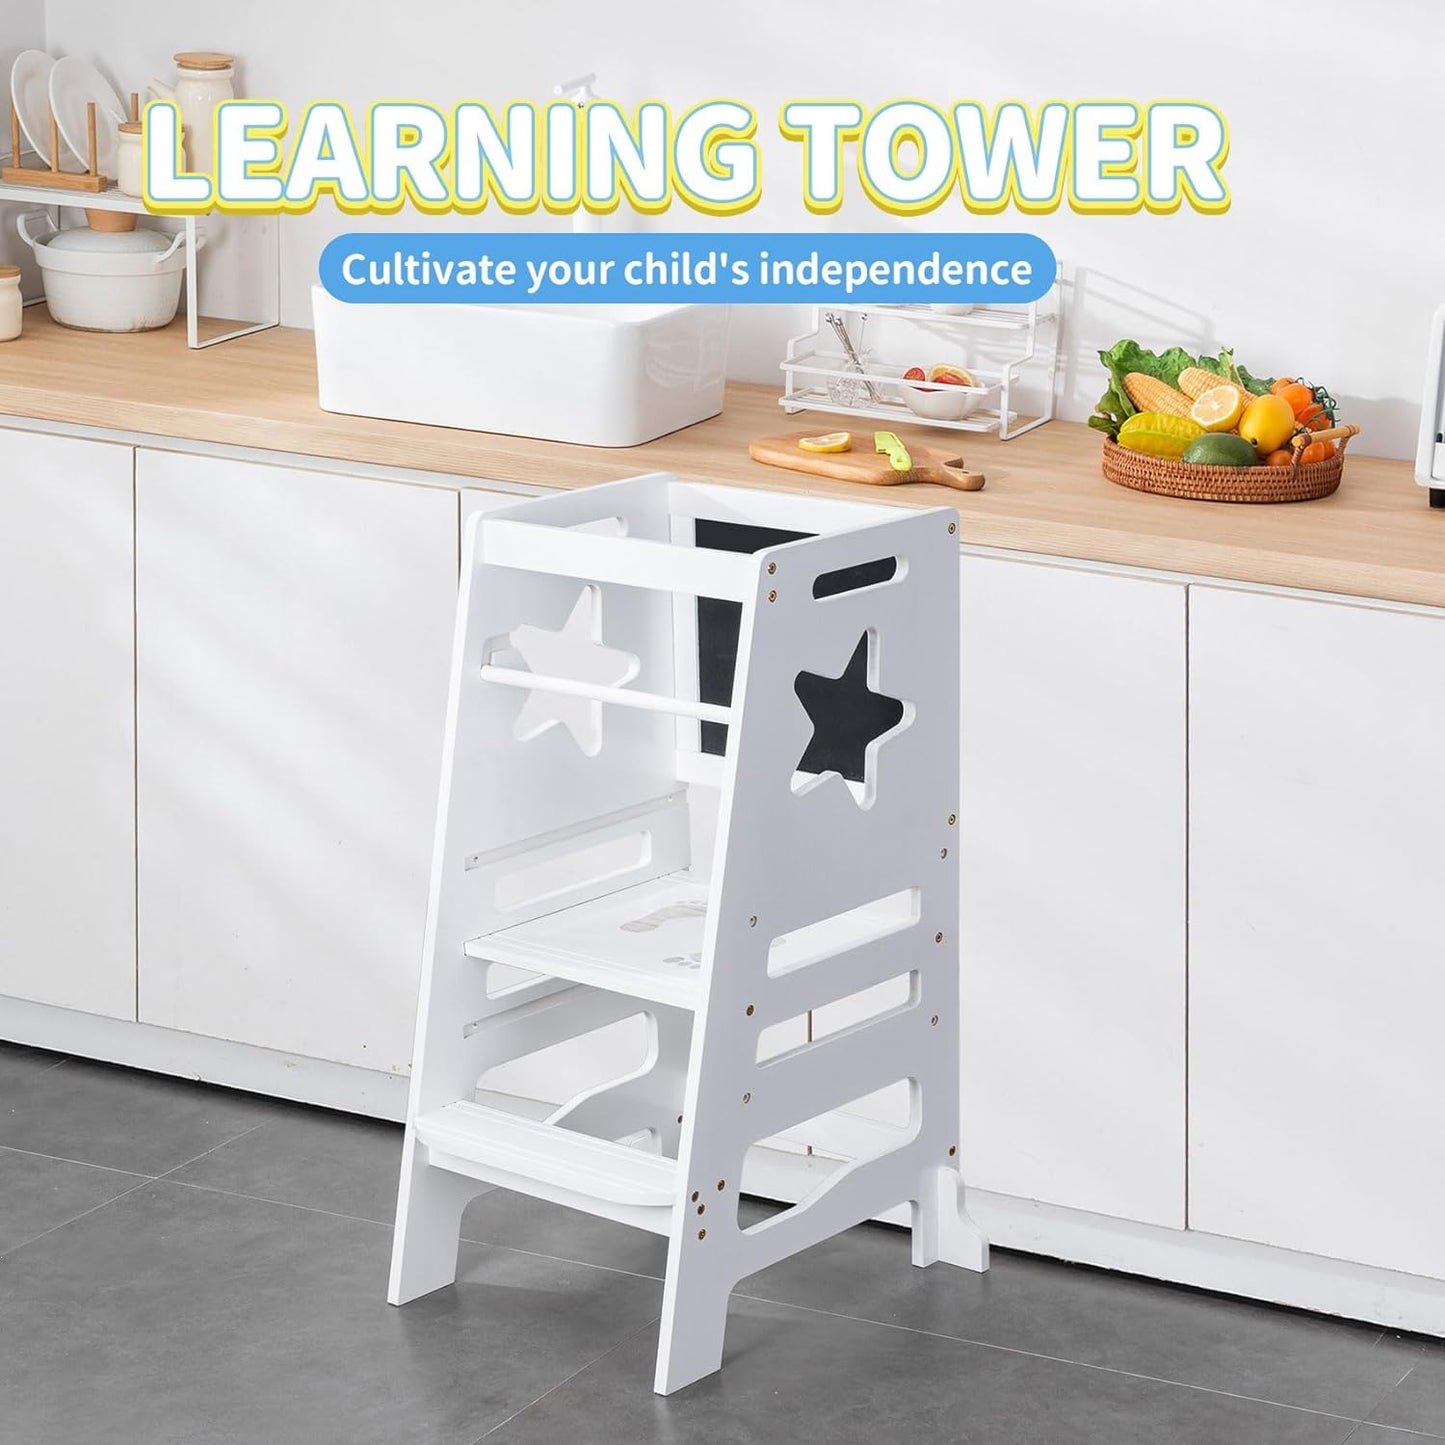 UNICOO Montessori Learning Tower Safe Step Stool for Little Explorers, Perfect Tower for Growing Skills Ideal Assistant for Tiny Chefs in The Kitchen with Engaging Activity Board (S033)